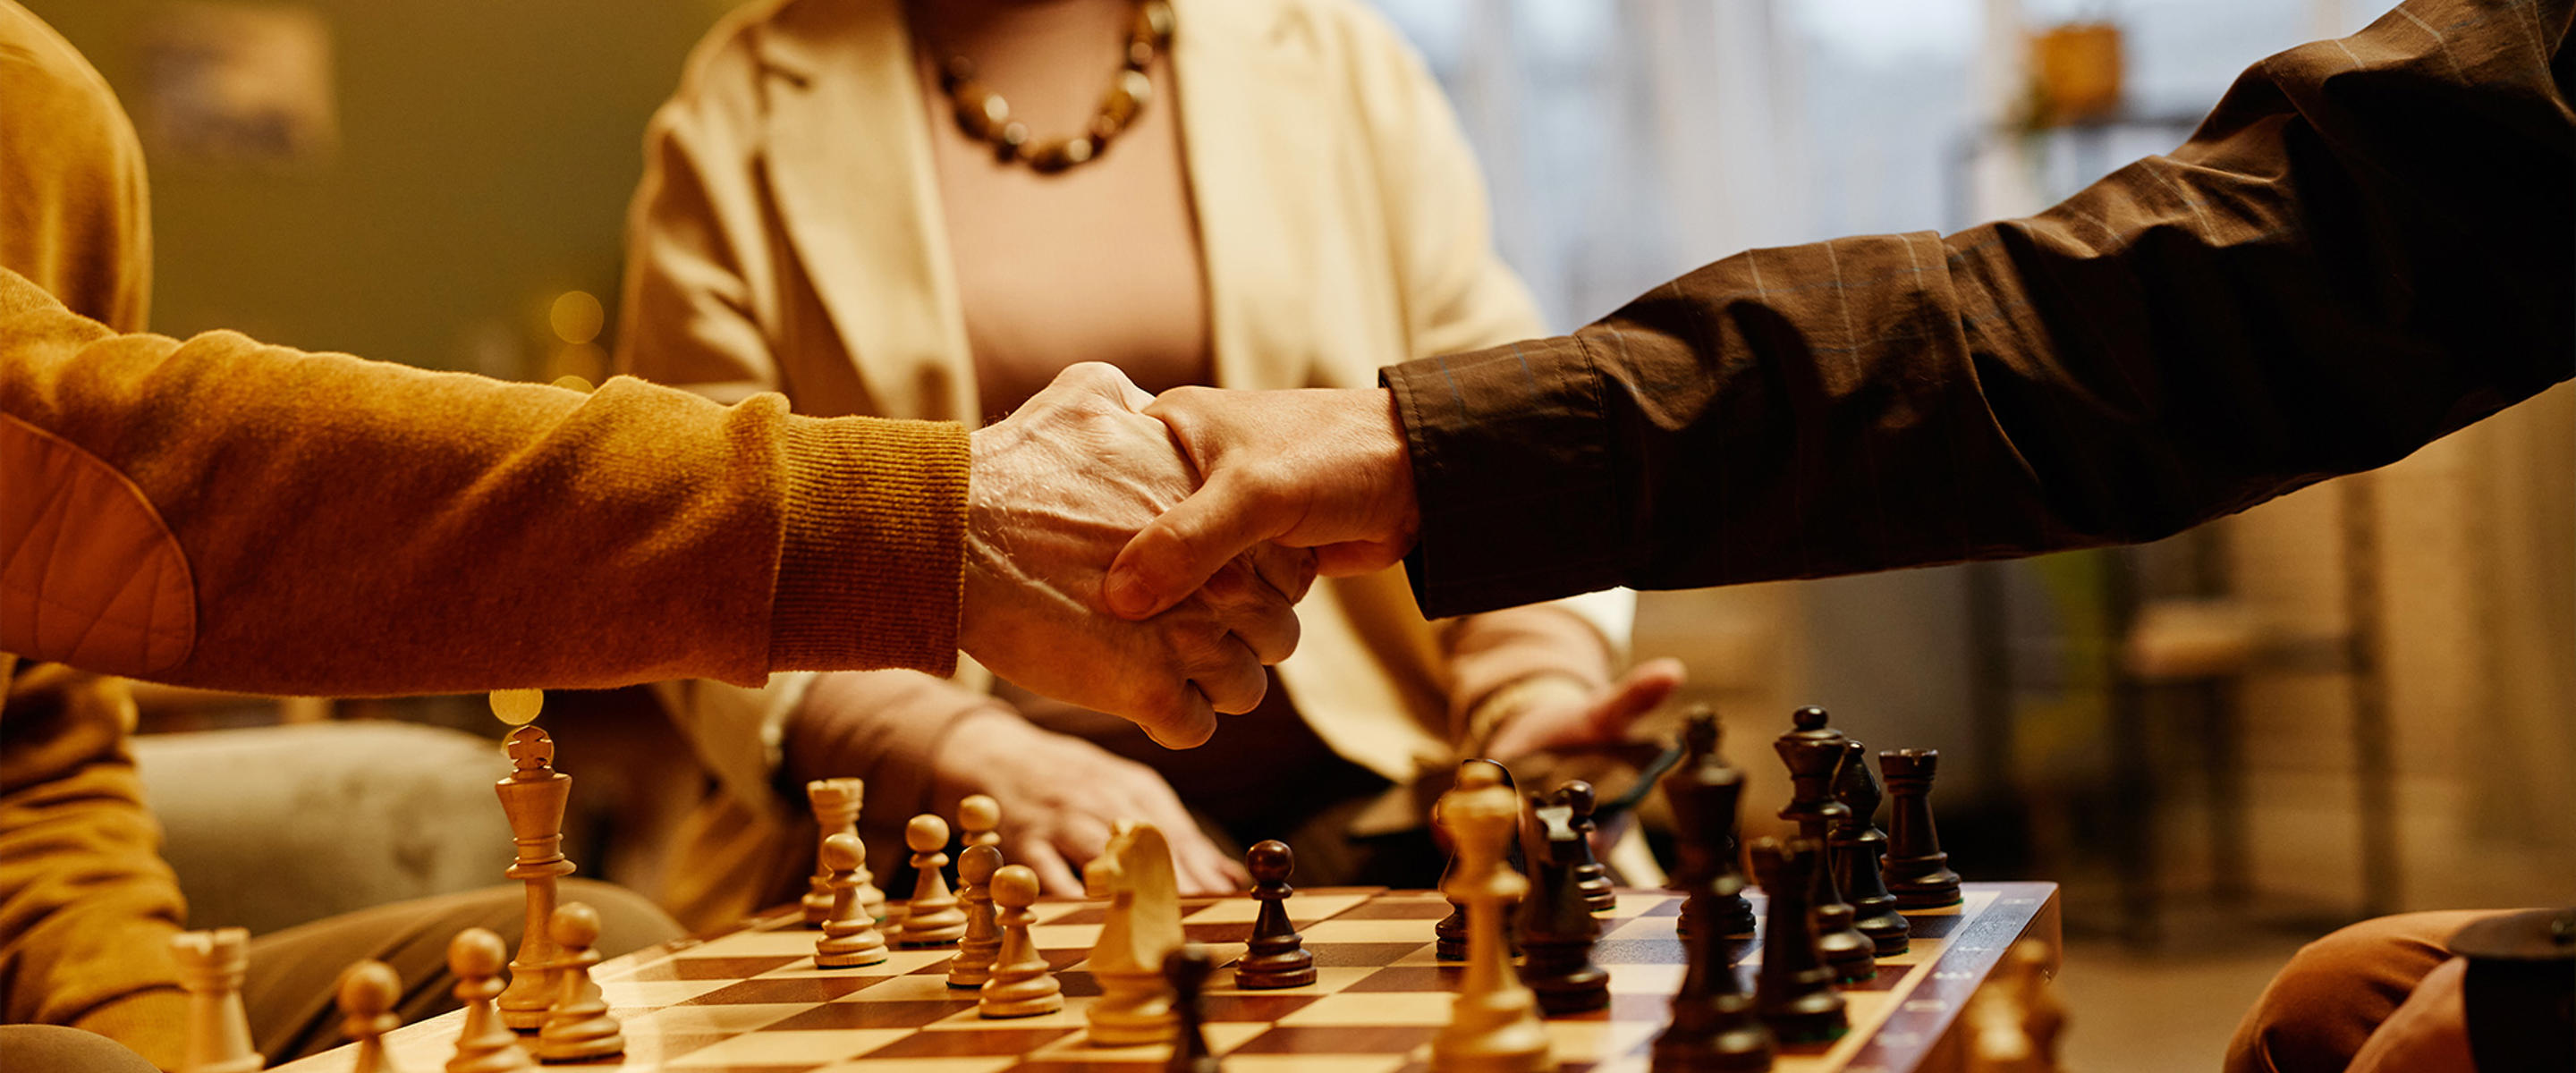 Cropped image of two people's arms in a handshake, reaching across a chessboard, in an aged care setting